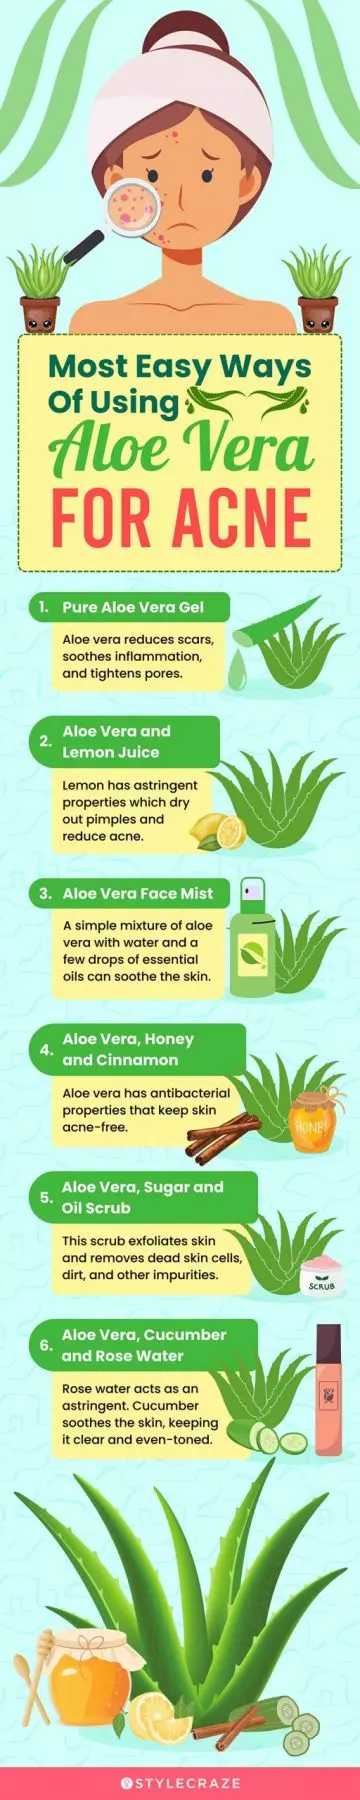 most easy ways of using aloe vera for acne (infographic)